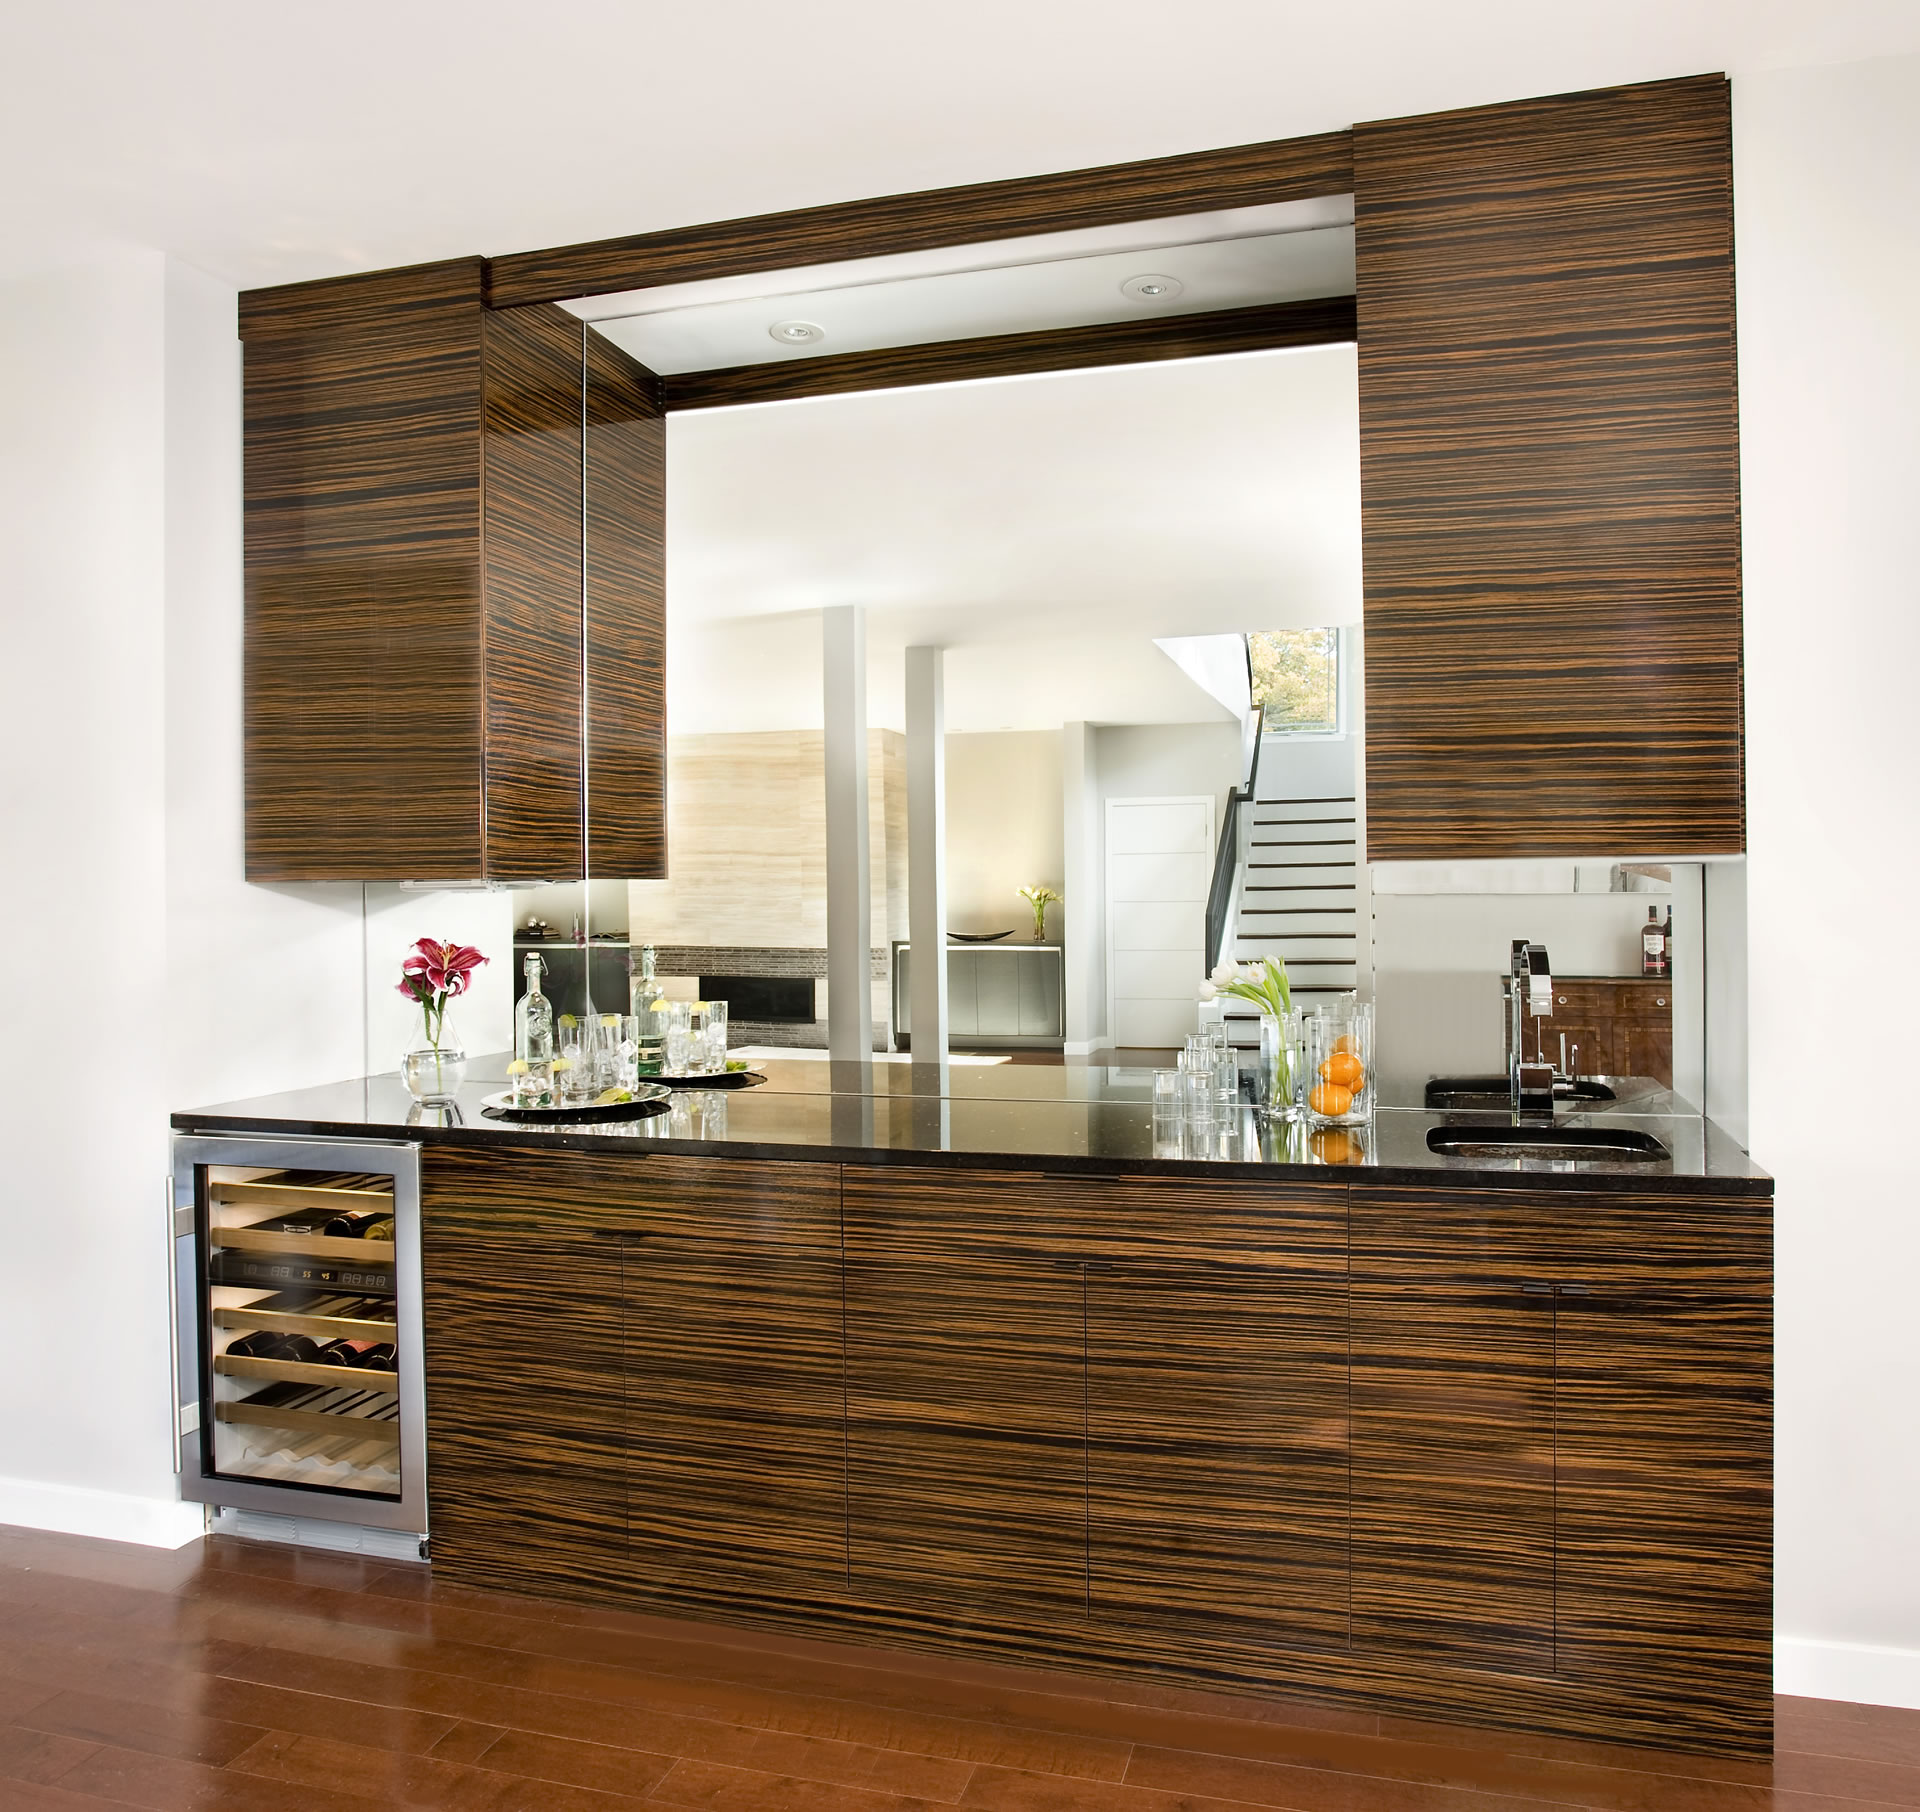 Newton Kitchens & Design - Truly hand-crafted cabinetry